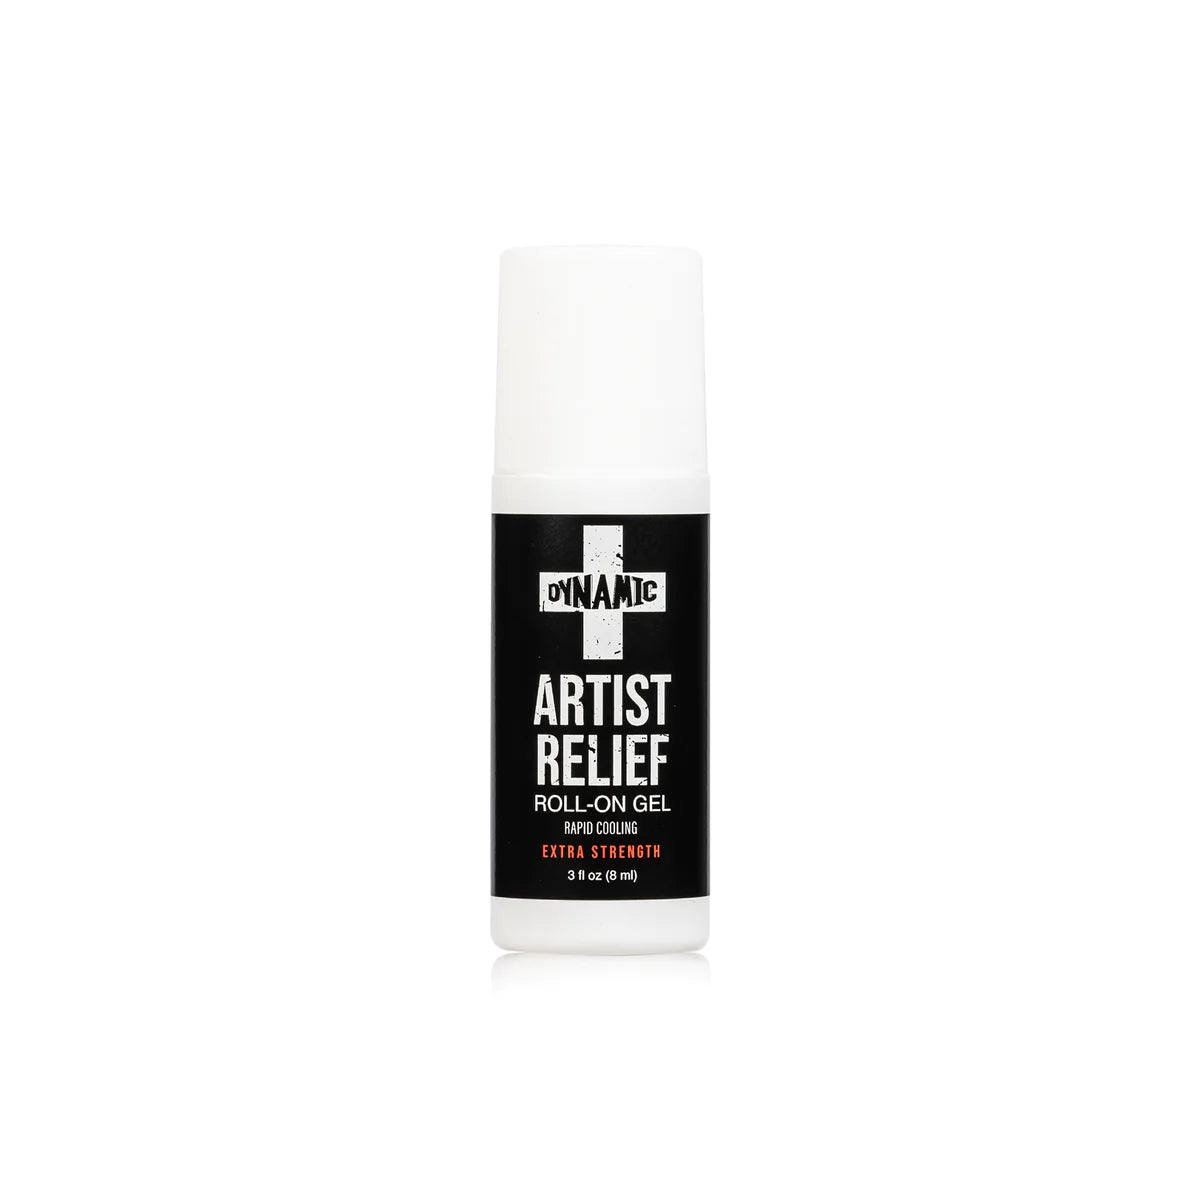 DYNAMIC ARTIST RELIEF COOLING GEL - 4OZ ROLL ON